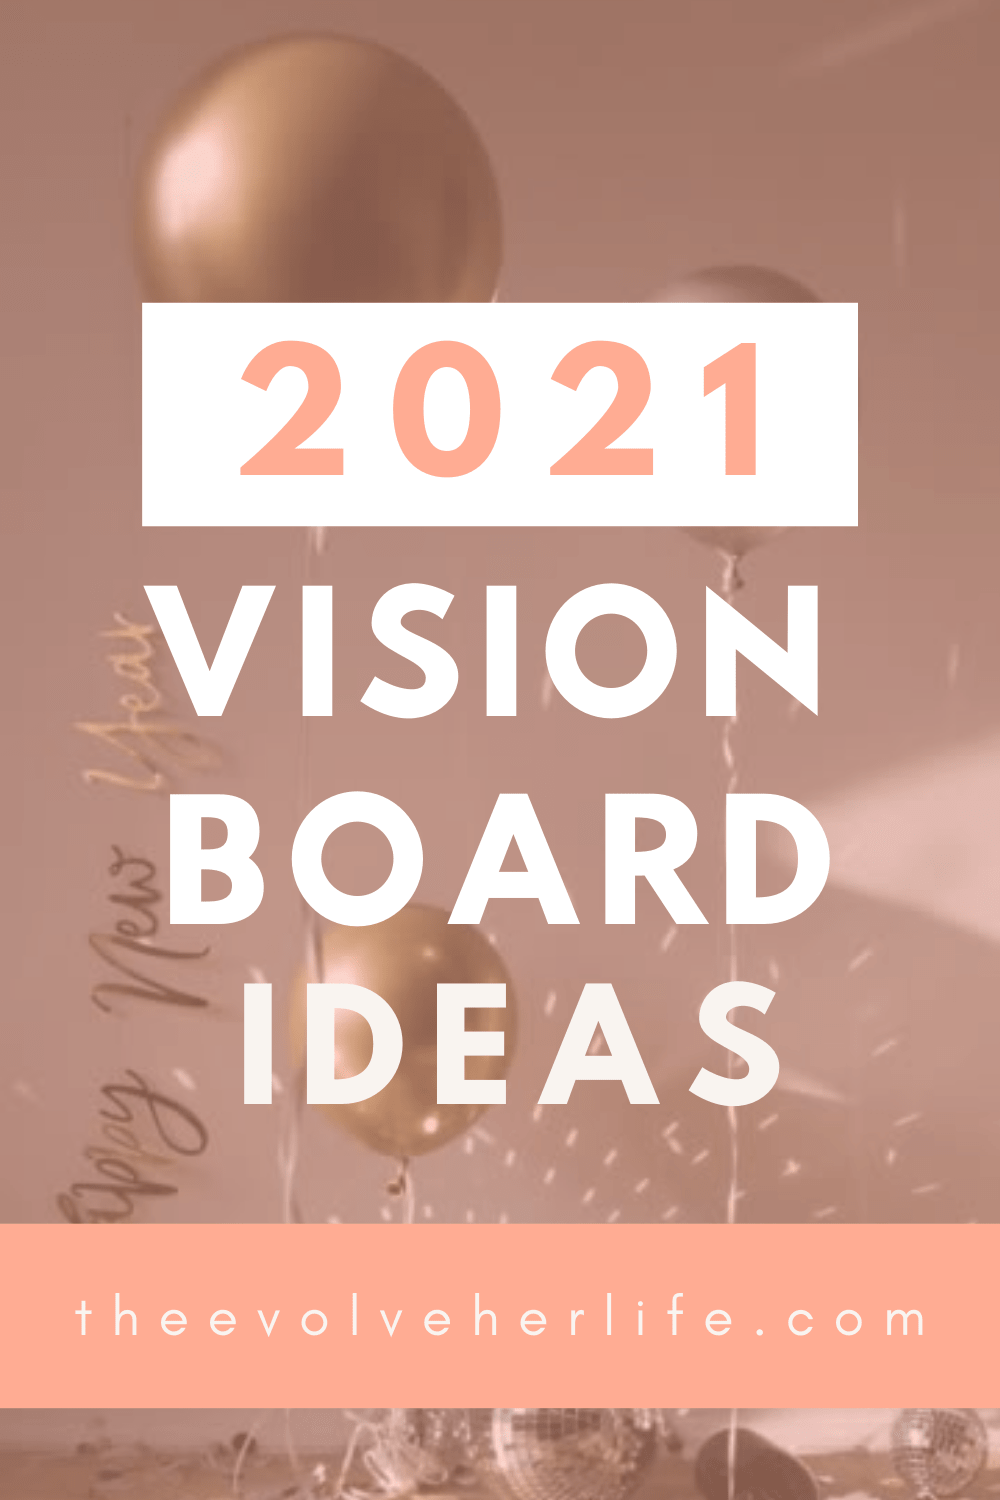 7 Inspirational Vision Board Ideas That Actually Work In 21 Evolve Her Life